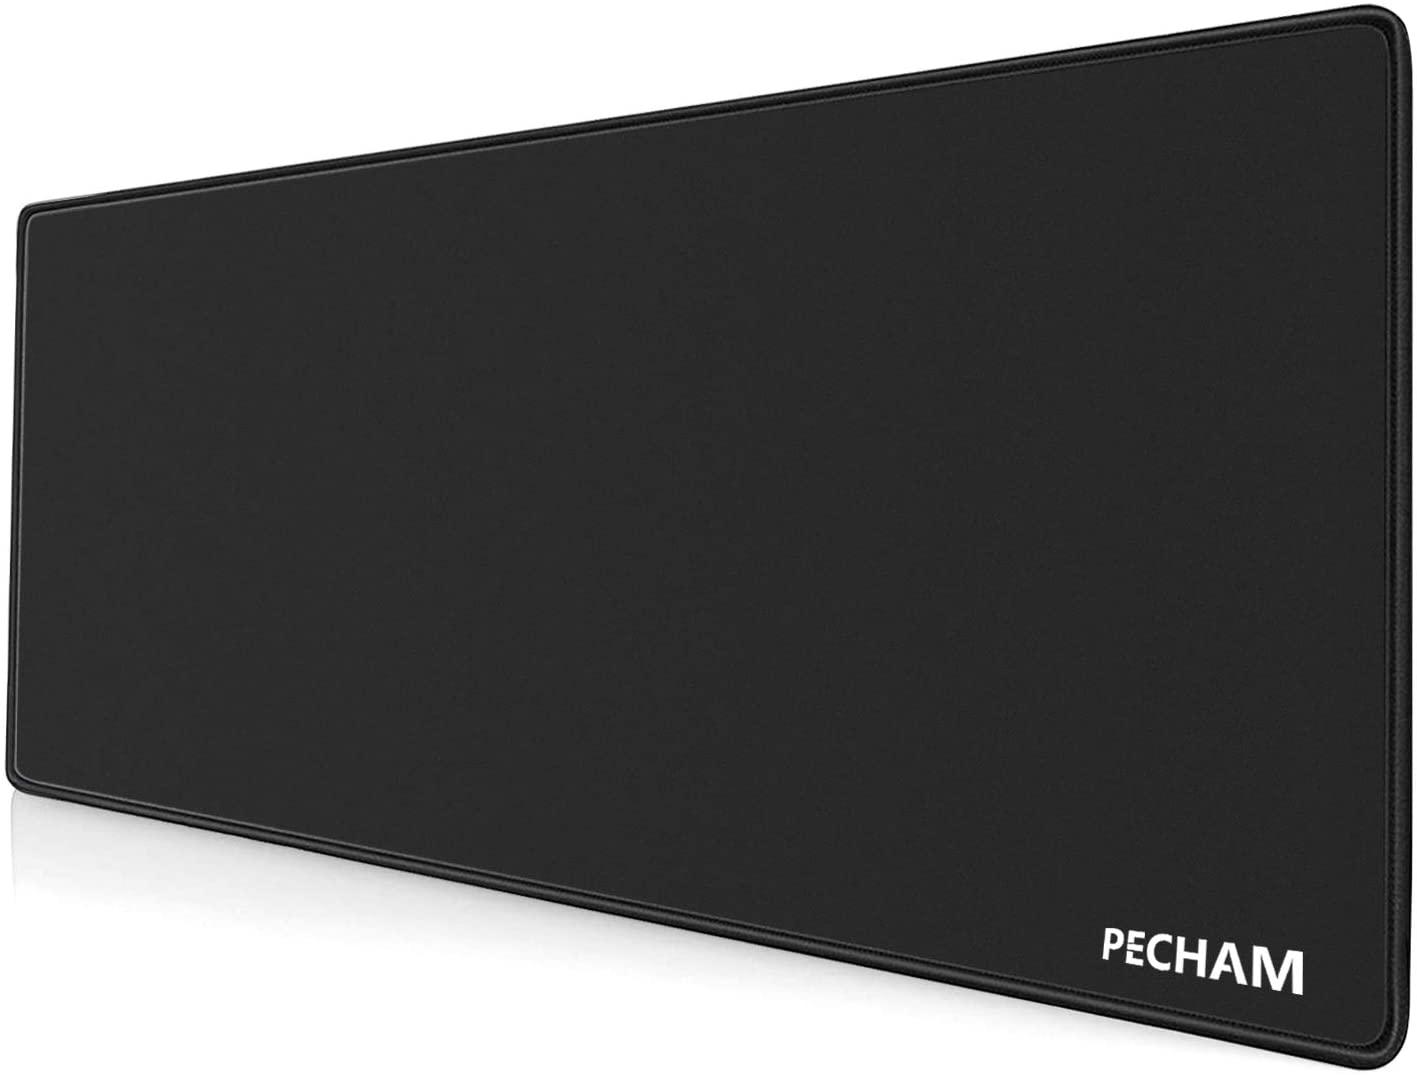 Pecham XXXL 3mm Extended Gaming Mouse Pad for $8.39